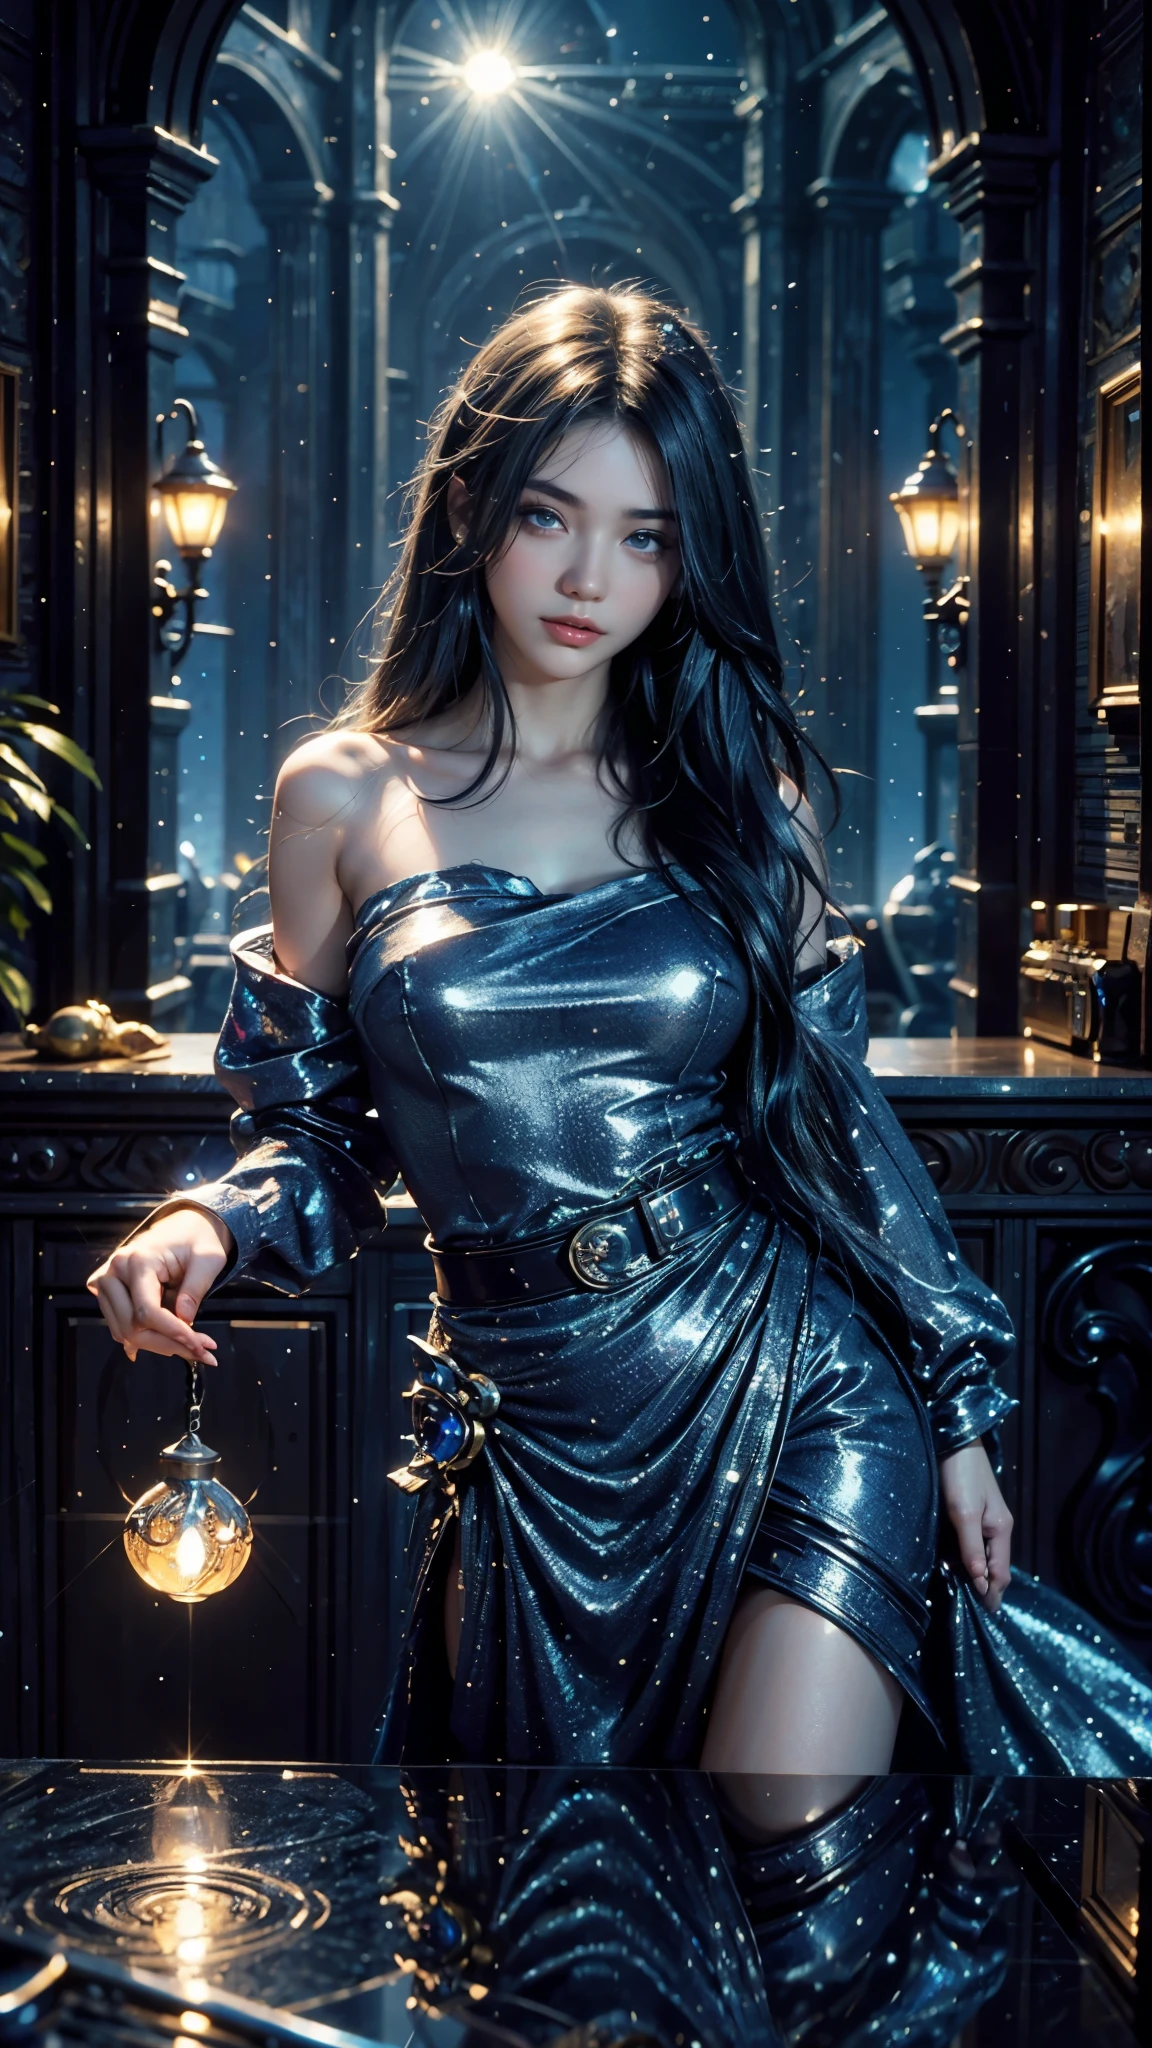 4k, UHD, masterpiece, 1 girl, good face, ((detailed eyes)), very long hair, impressive hairstyle, perfect brasts, fantasy cosplay, blue cosplay, (bare waist:0.8), night city, building, lamps, depth of field, reflection light, sparkle, chromatic aberration,